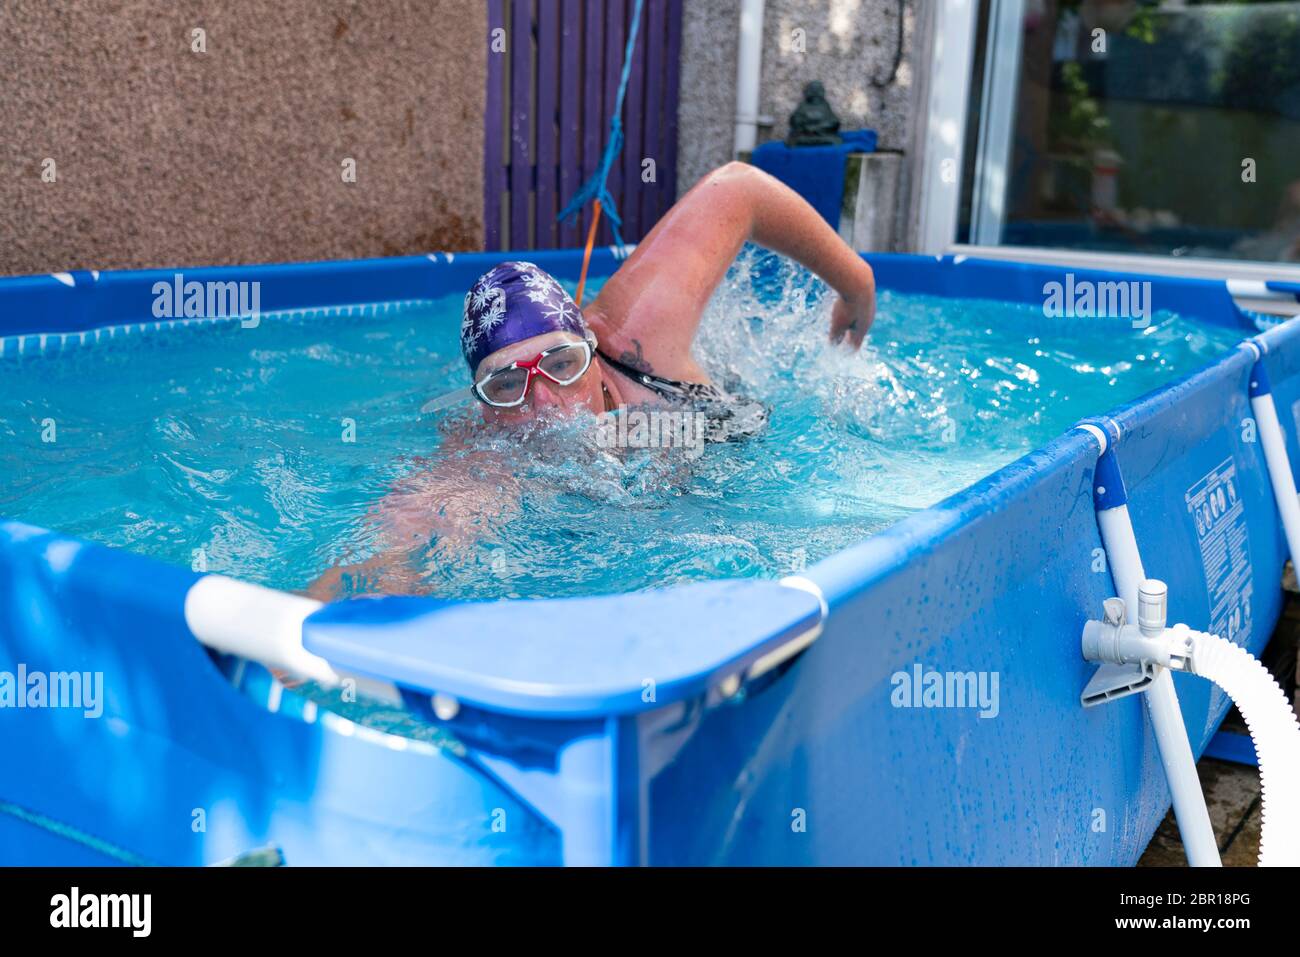 Rosyth, Scotland, UK. 20 May 2020. Jenny Waring (41) from Rosyth, Fife, a wild open water swimmer with the Fife Wild Swimmers group, during a daily dip in her garden pool. Many wild swimmers have been denied the opportunity to pursue their sport during Covid-19 lockdown and have purchased pools for their gardens to maintain their wellbeing. Iain Masterton/Alamy Live News Stock Photo